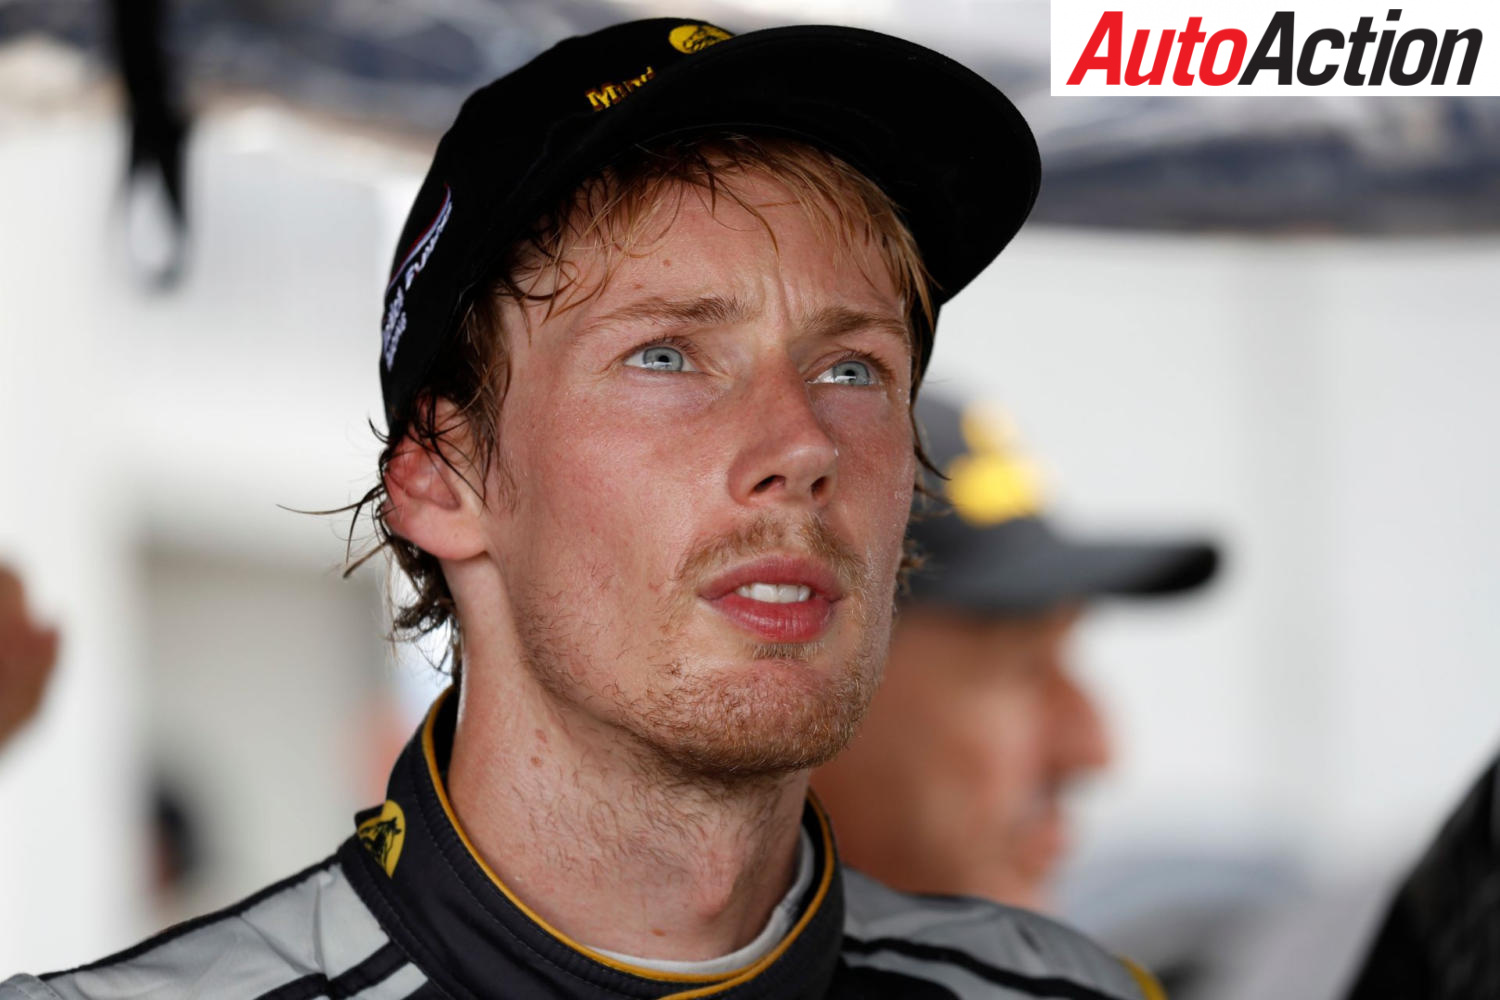 Brendon Hartley takes place of Fernando Alonso at Toyota - Photo: LAT